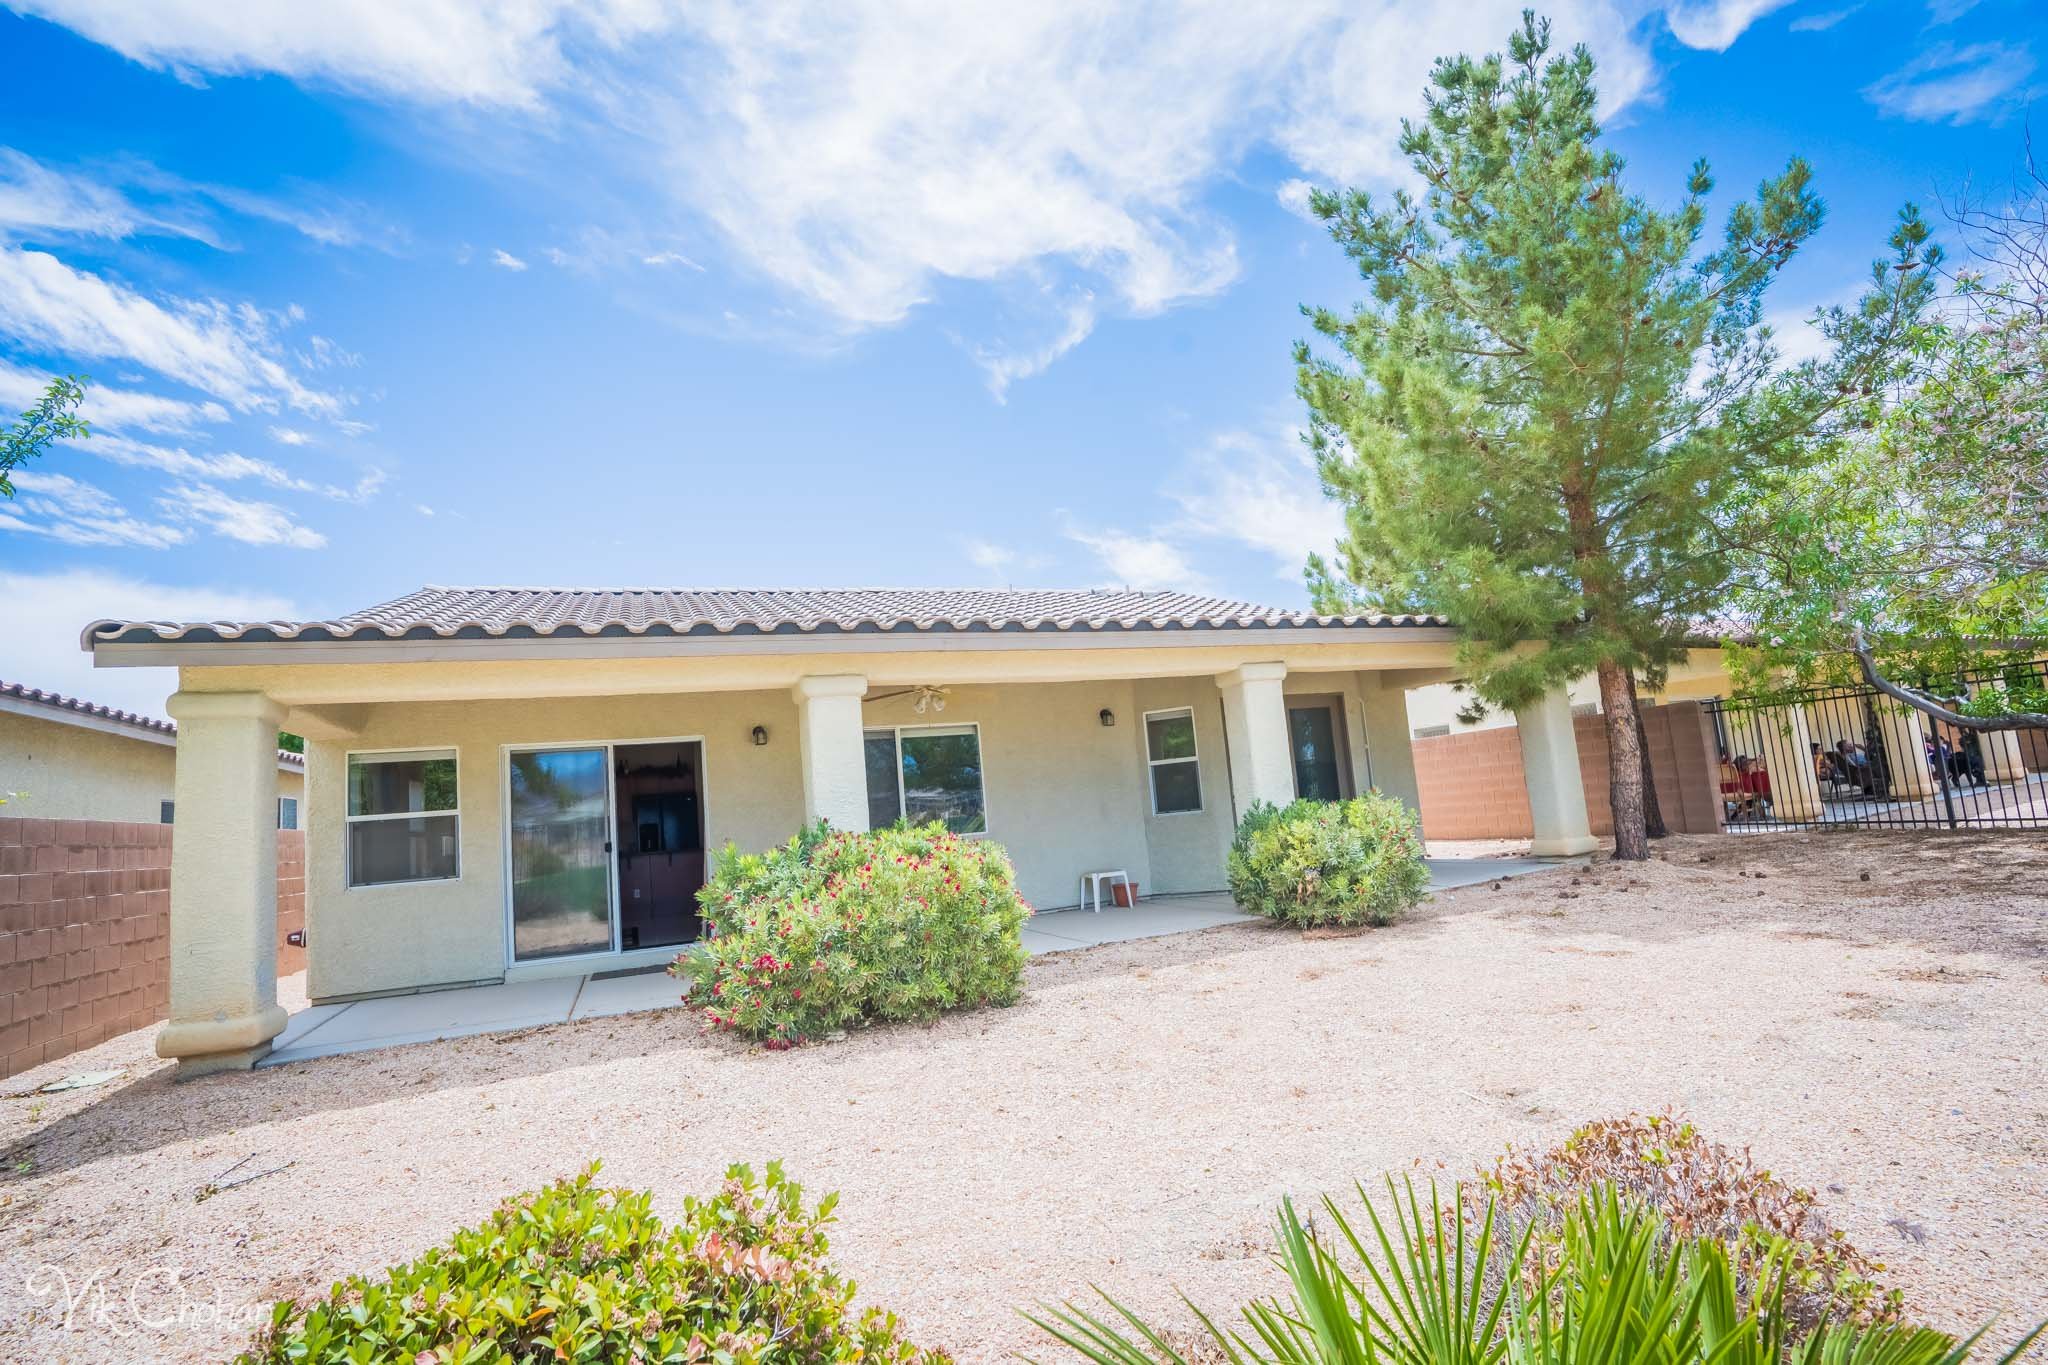 2022-05-15-5378-E-Cansano-St-Pahrump-Real-Estate-Photography-Virtual-Tour-Drone-Photography-Vik-Chohan-Photography-Photo-Booth-Social-Media-VCP-084.jpg